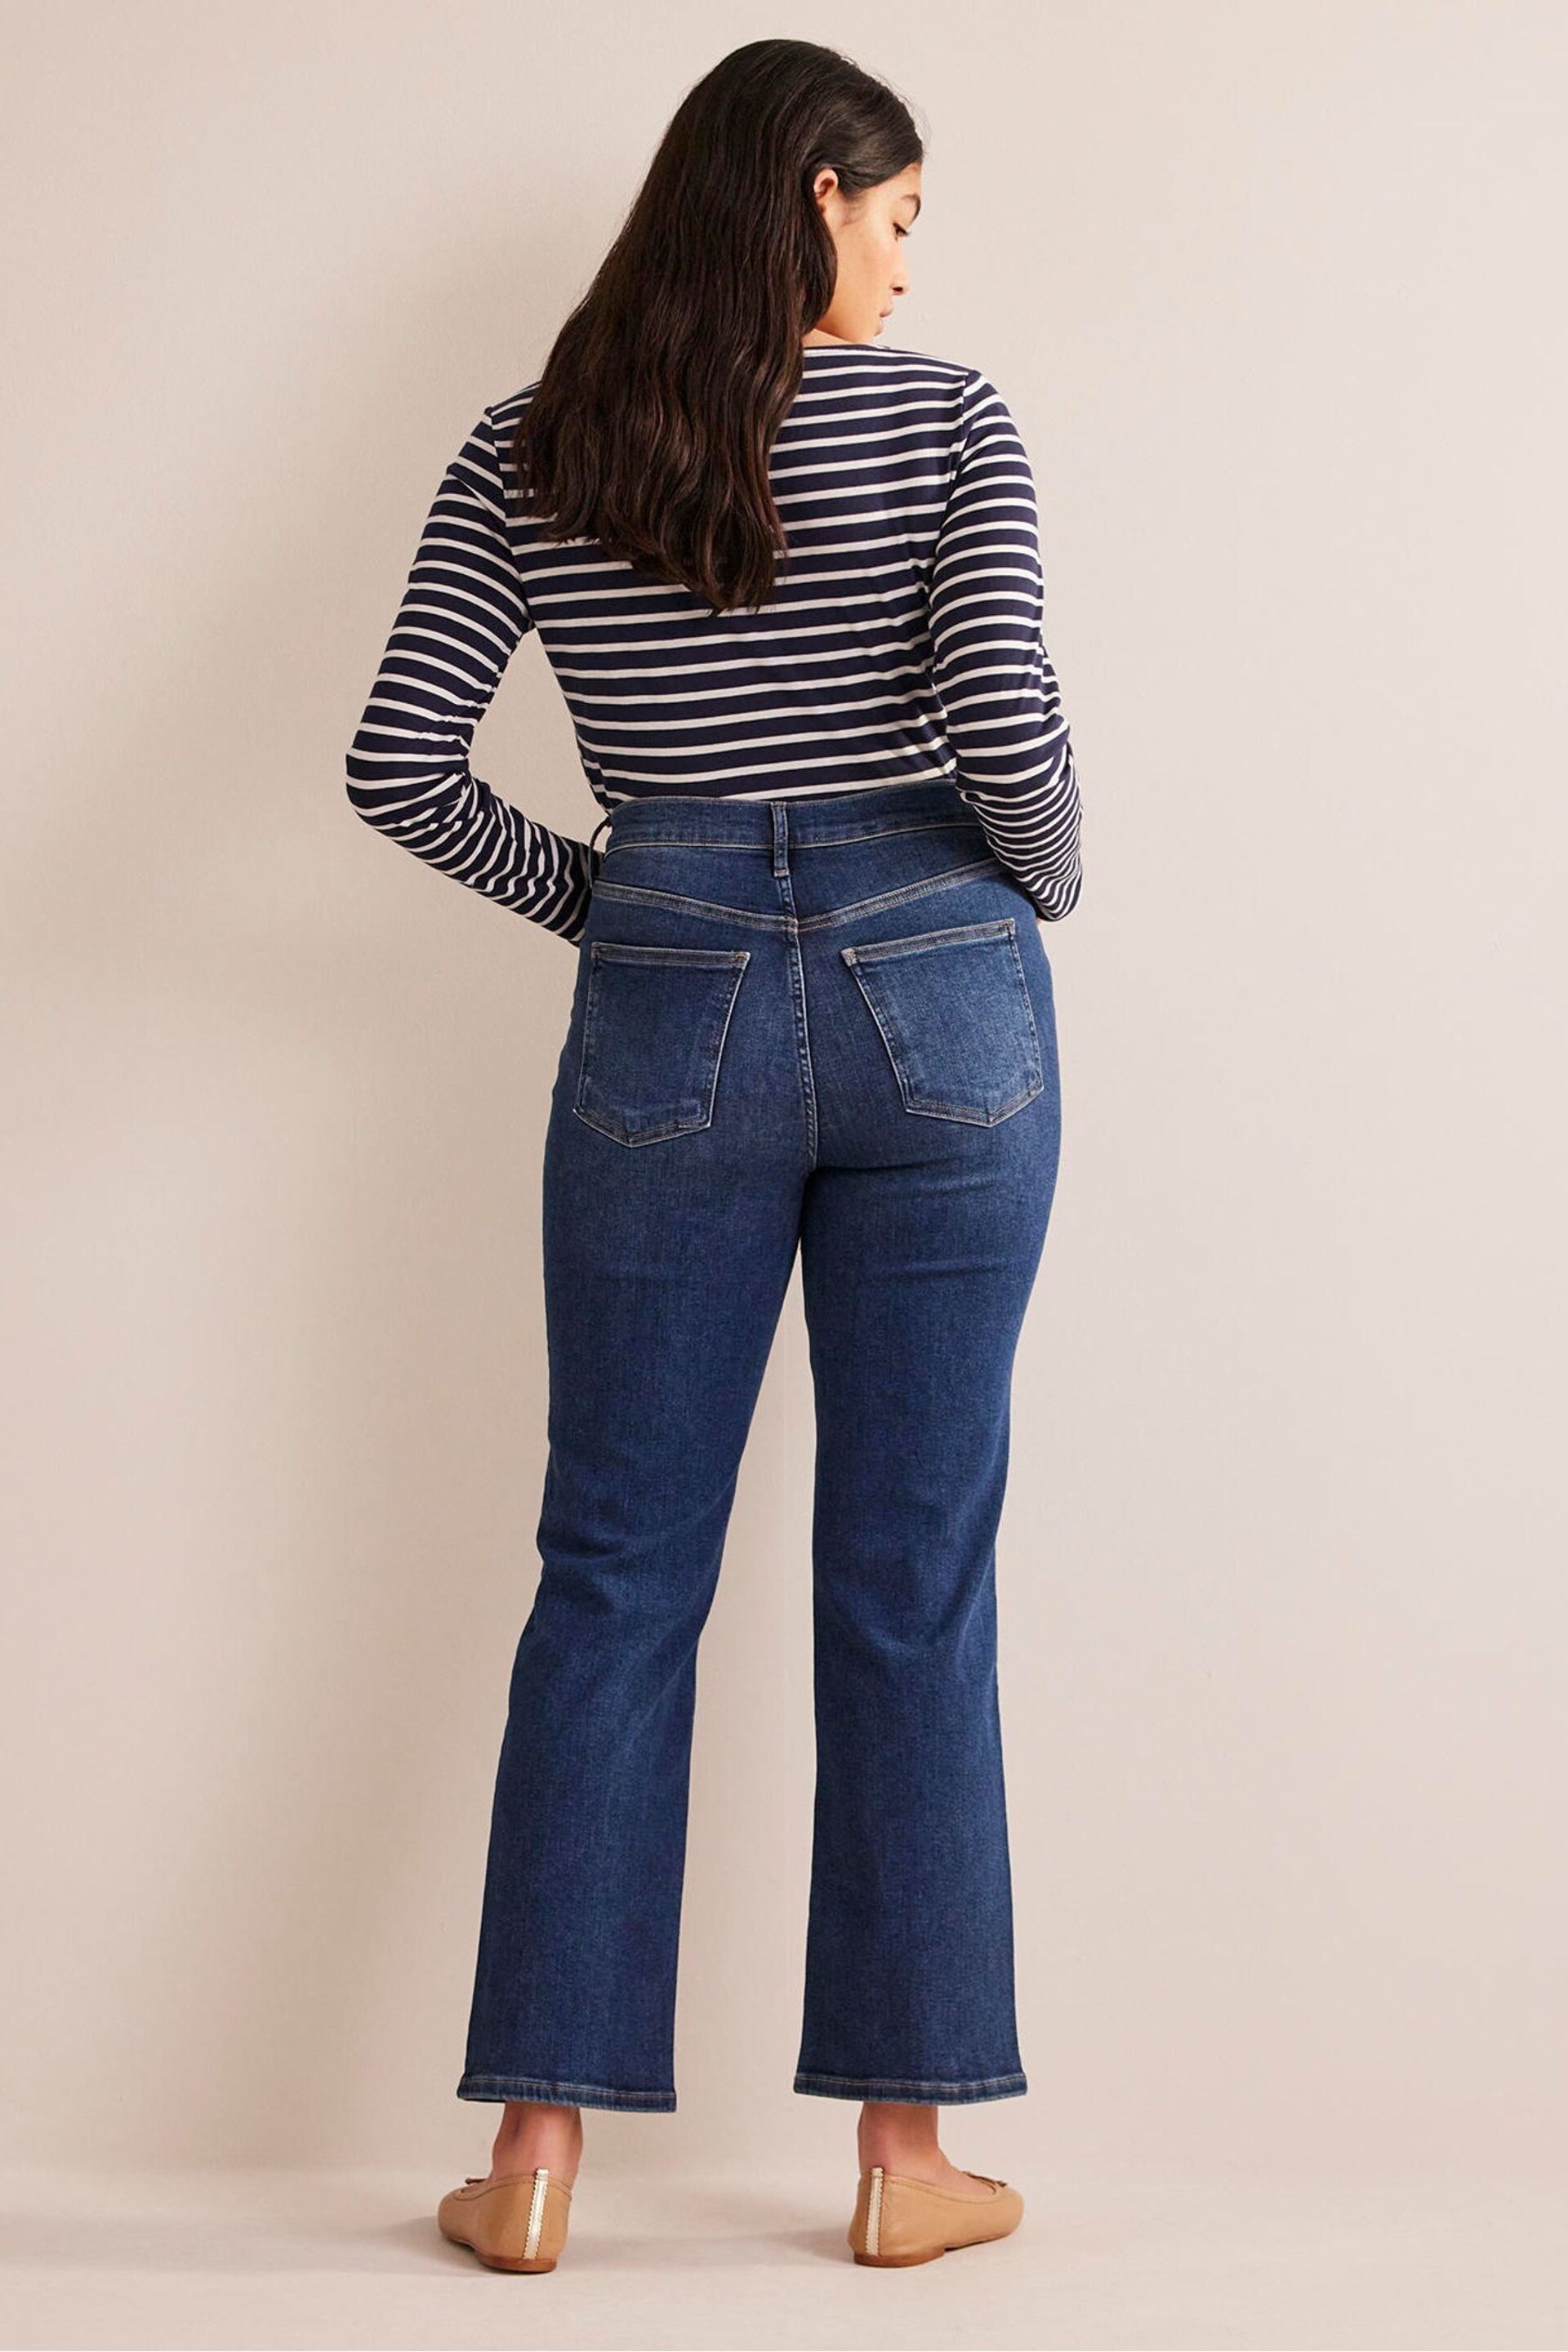 Boden Navy Blue High Rise True Straight Jeans - Image 5 of 8